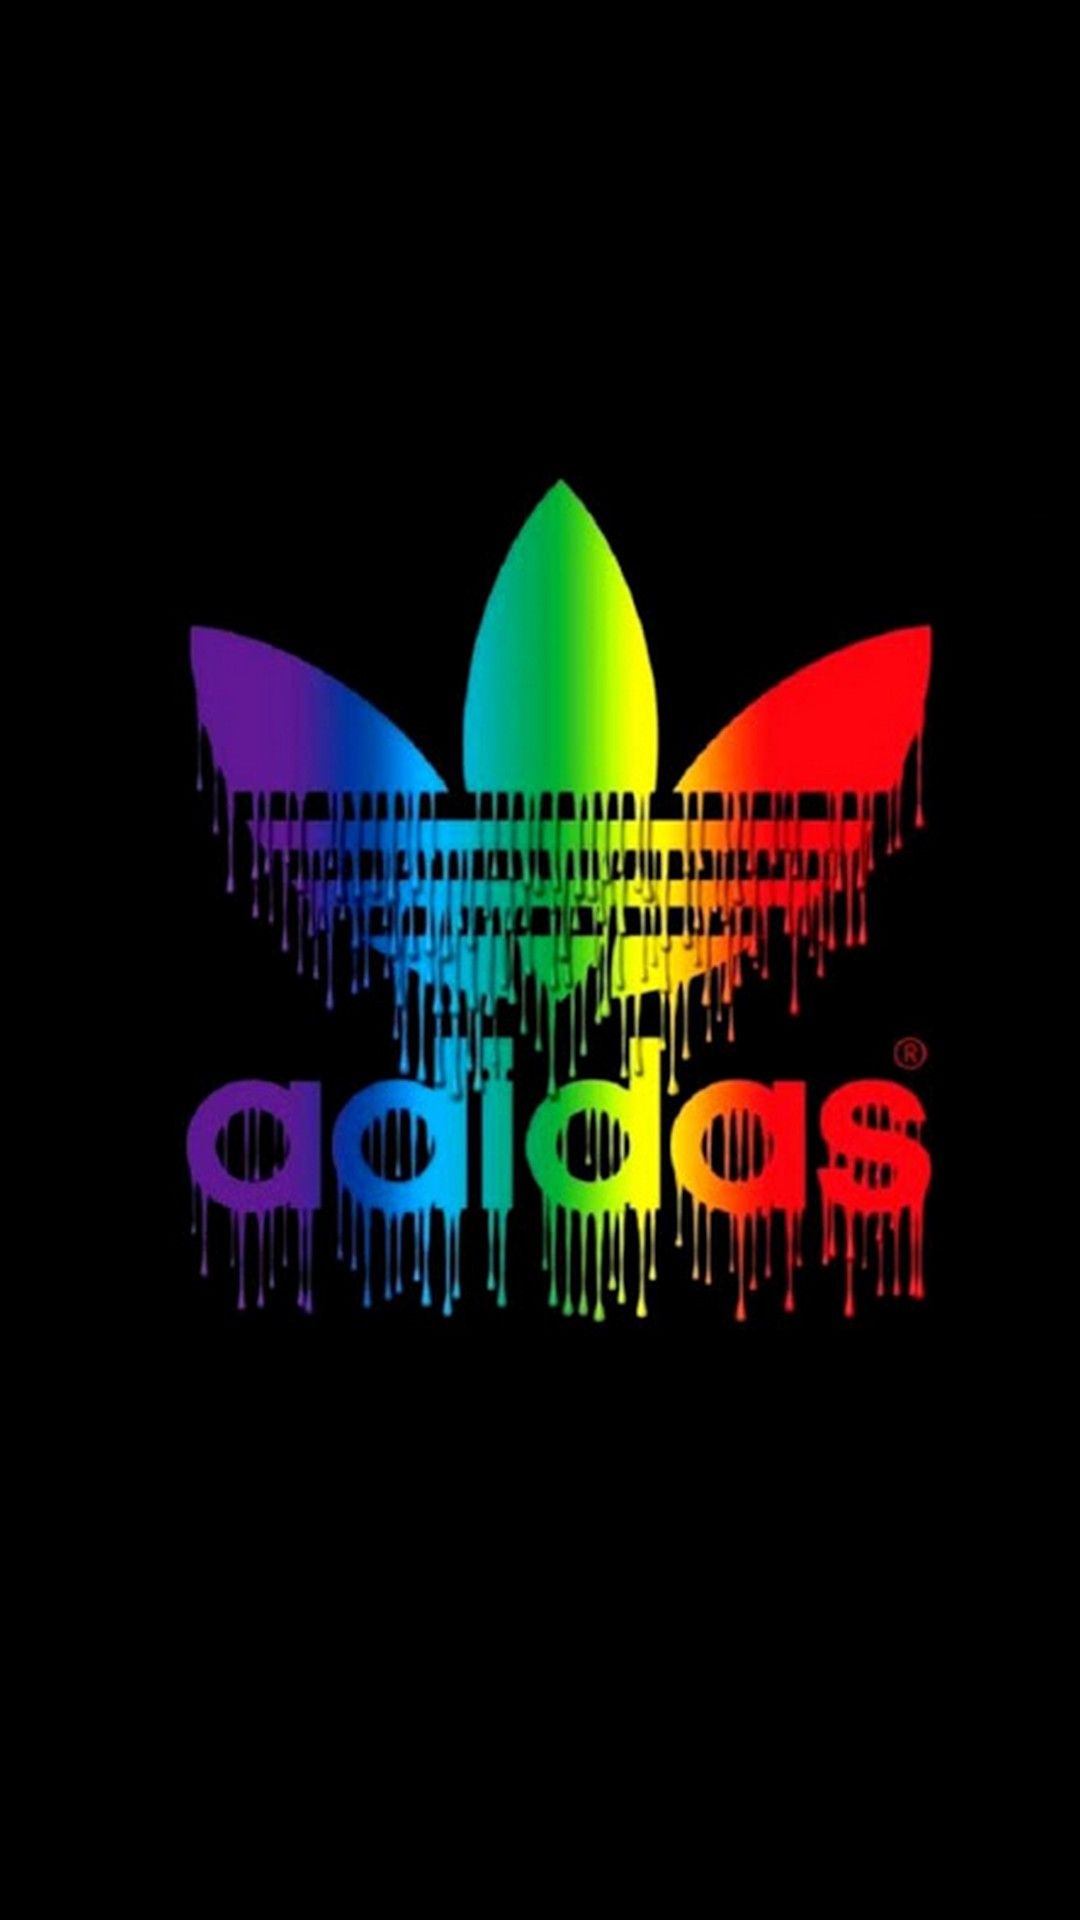 Spit out toy Standard Cool Adidas Logo Wallpapers on WallpaperDog